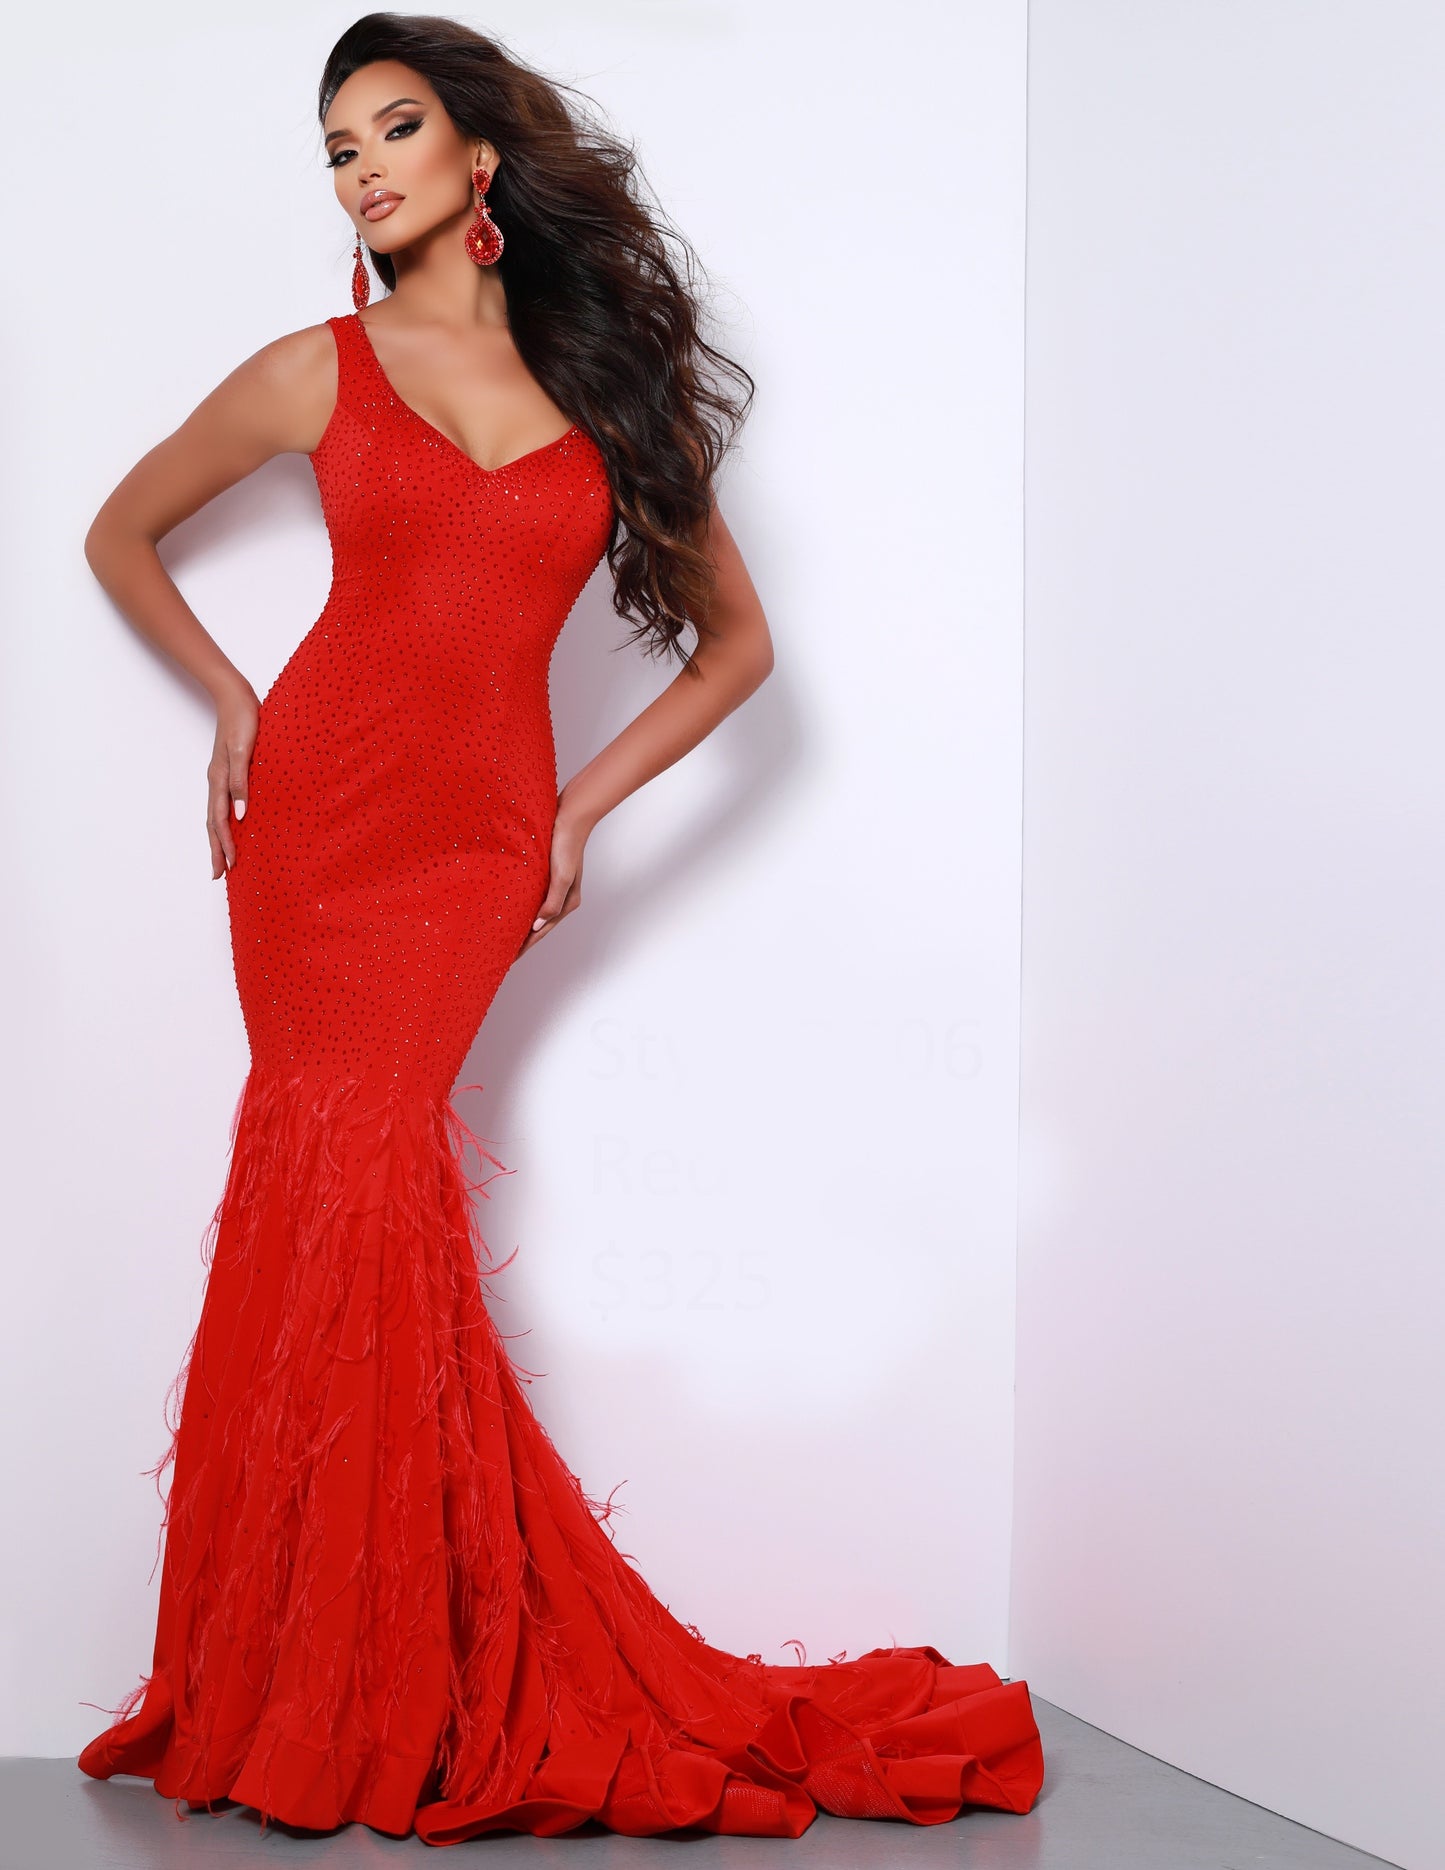 Johnathan Kayne 2406 Long Feather Mermaid Fitted Prom Dress Pageant Gown  Available Sizes: 0-18  Available Colors: Red,RoyalJohnathan Kayne 2406 Long Feather Mermaid Fitted Prom Dress Pageant Gown.  Mermaid pageant dress   Available Sizes: 0-18  Available Colors: Red, Royal, White